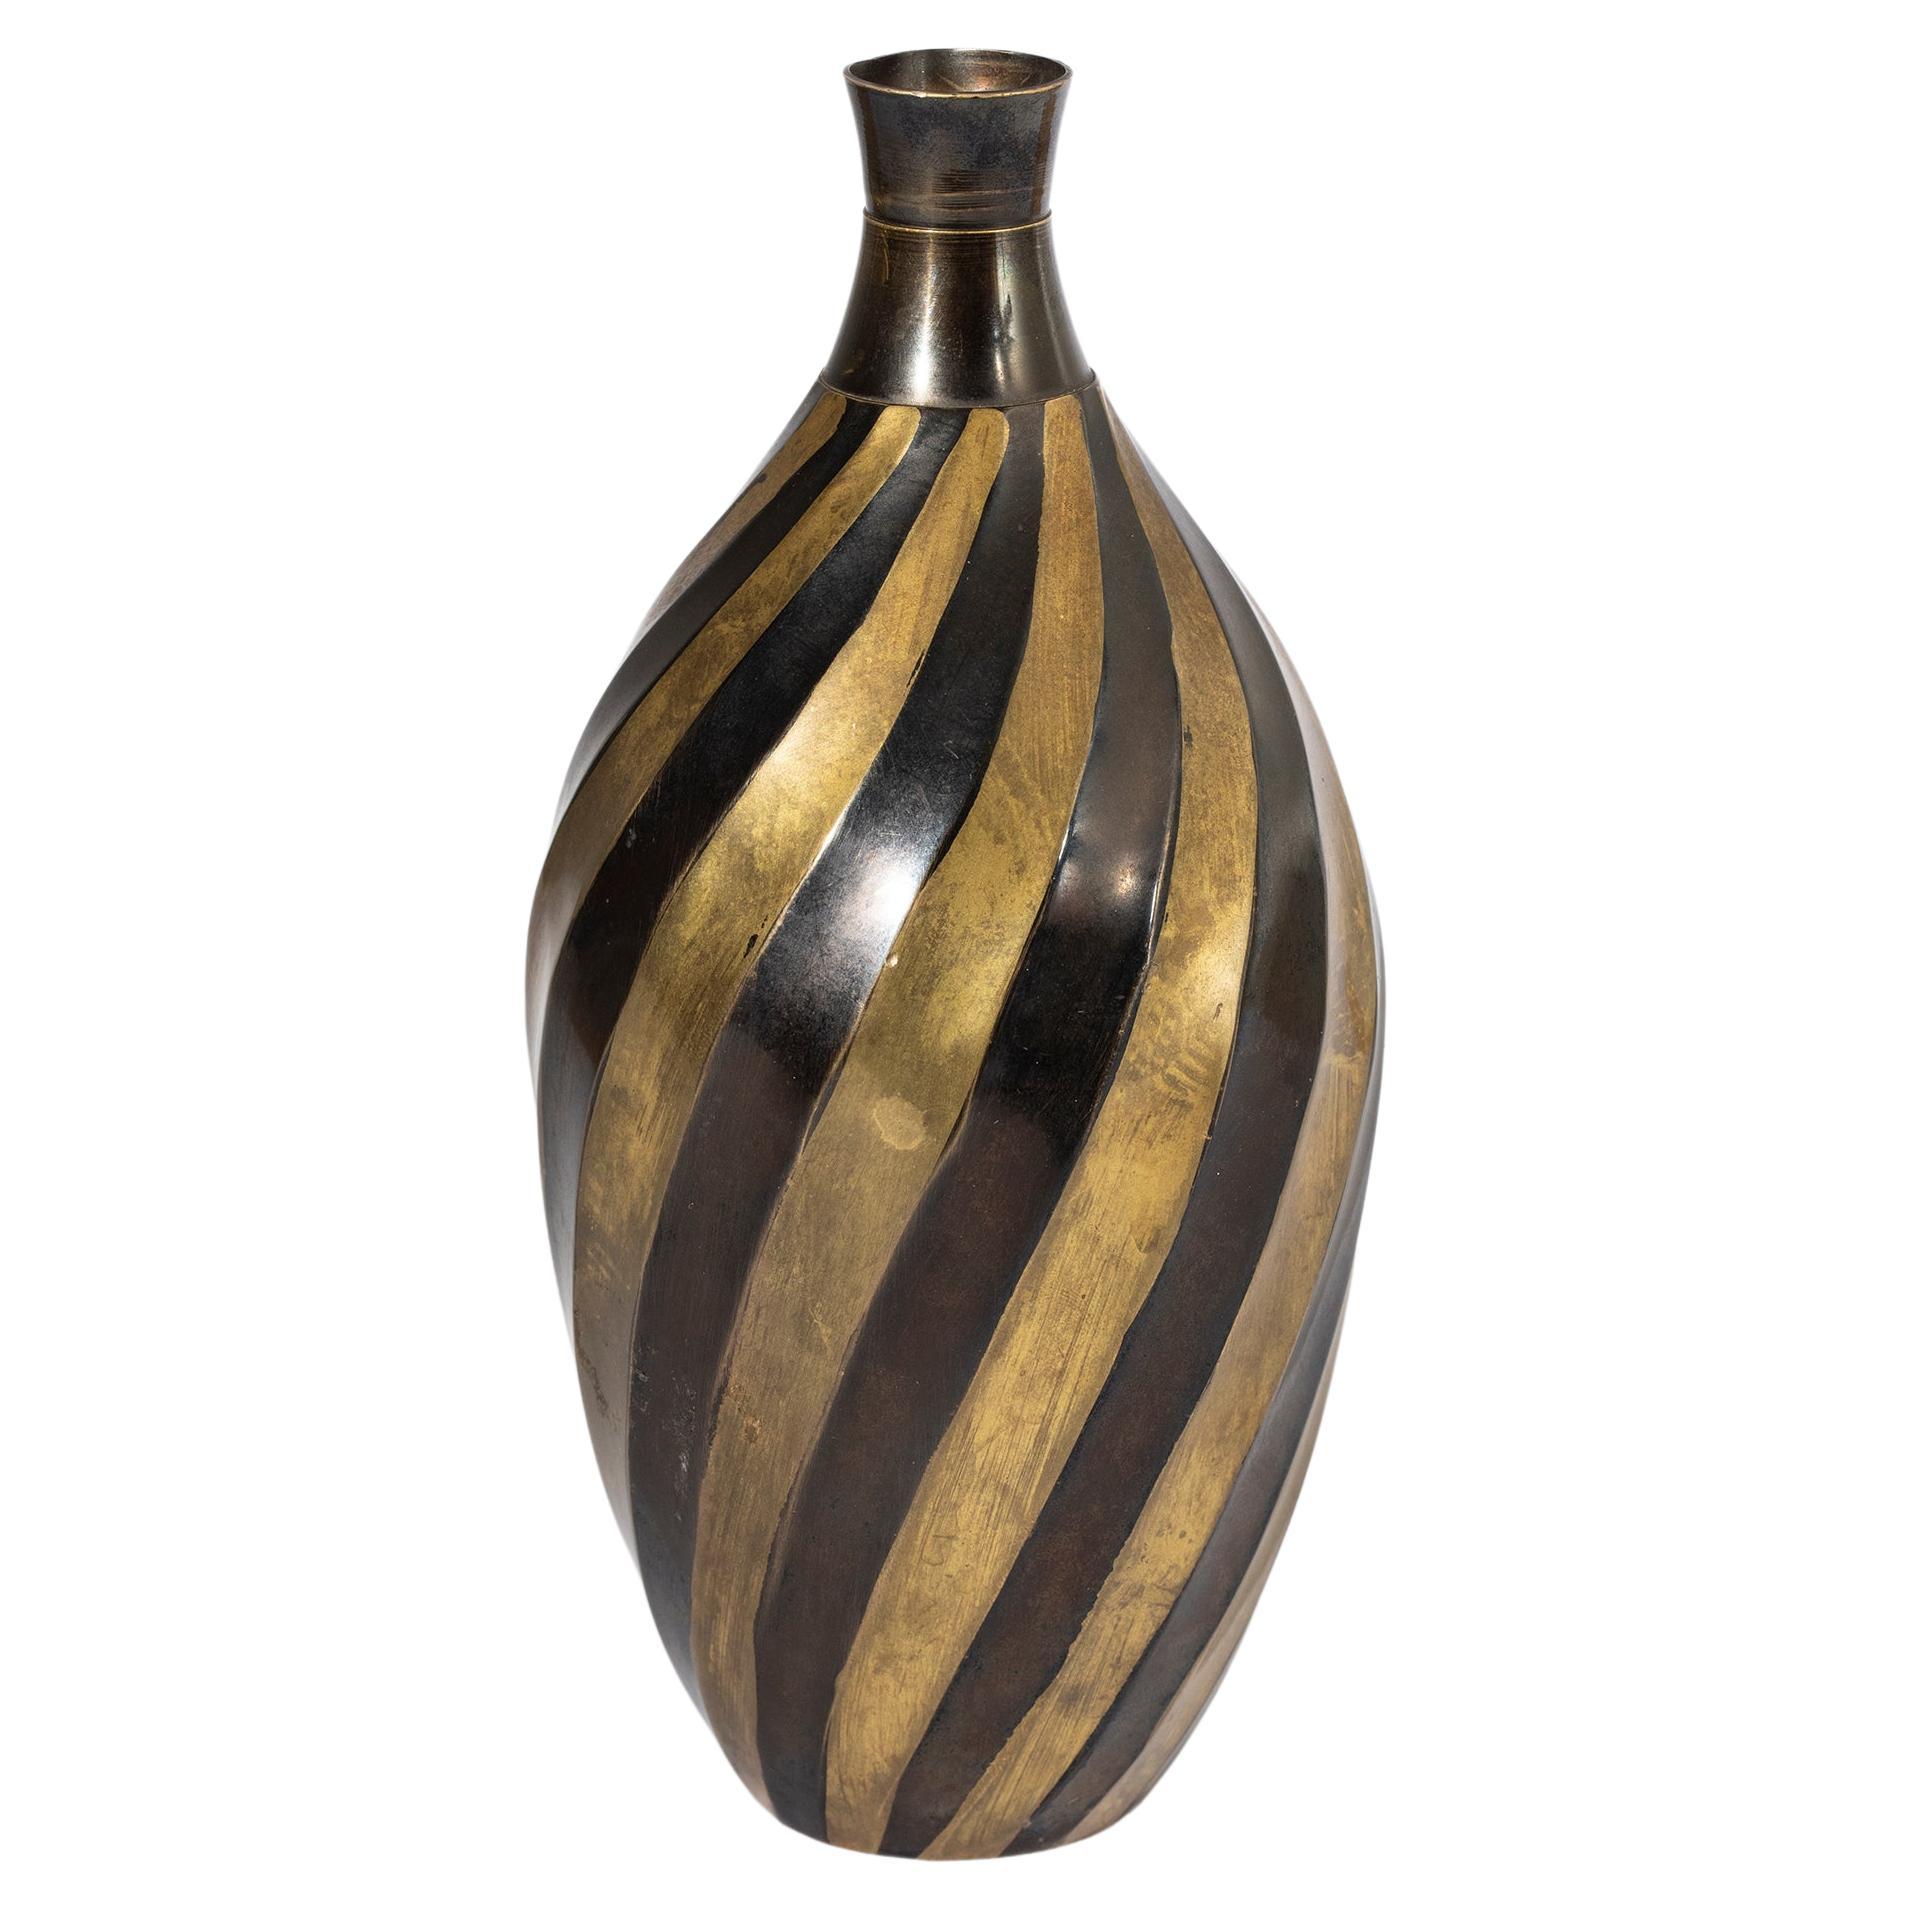 Deco vase, French manufacture, 1920s